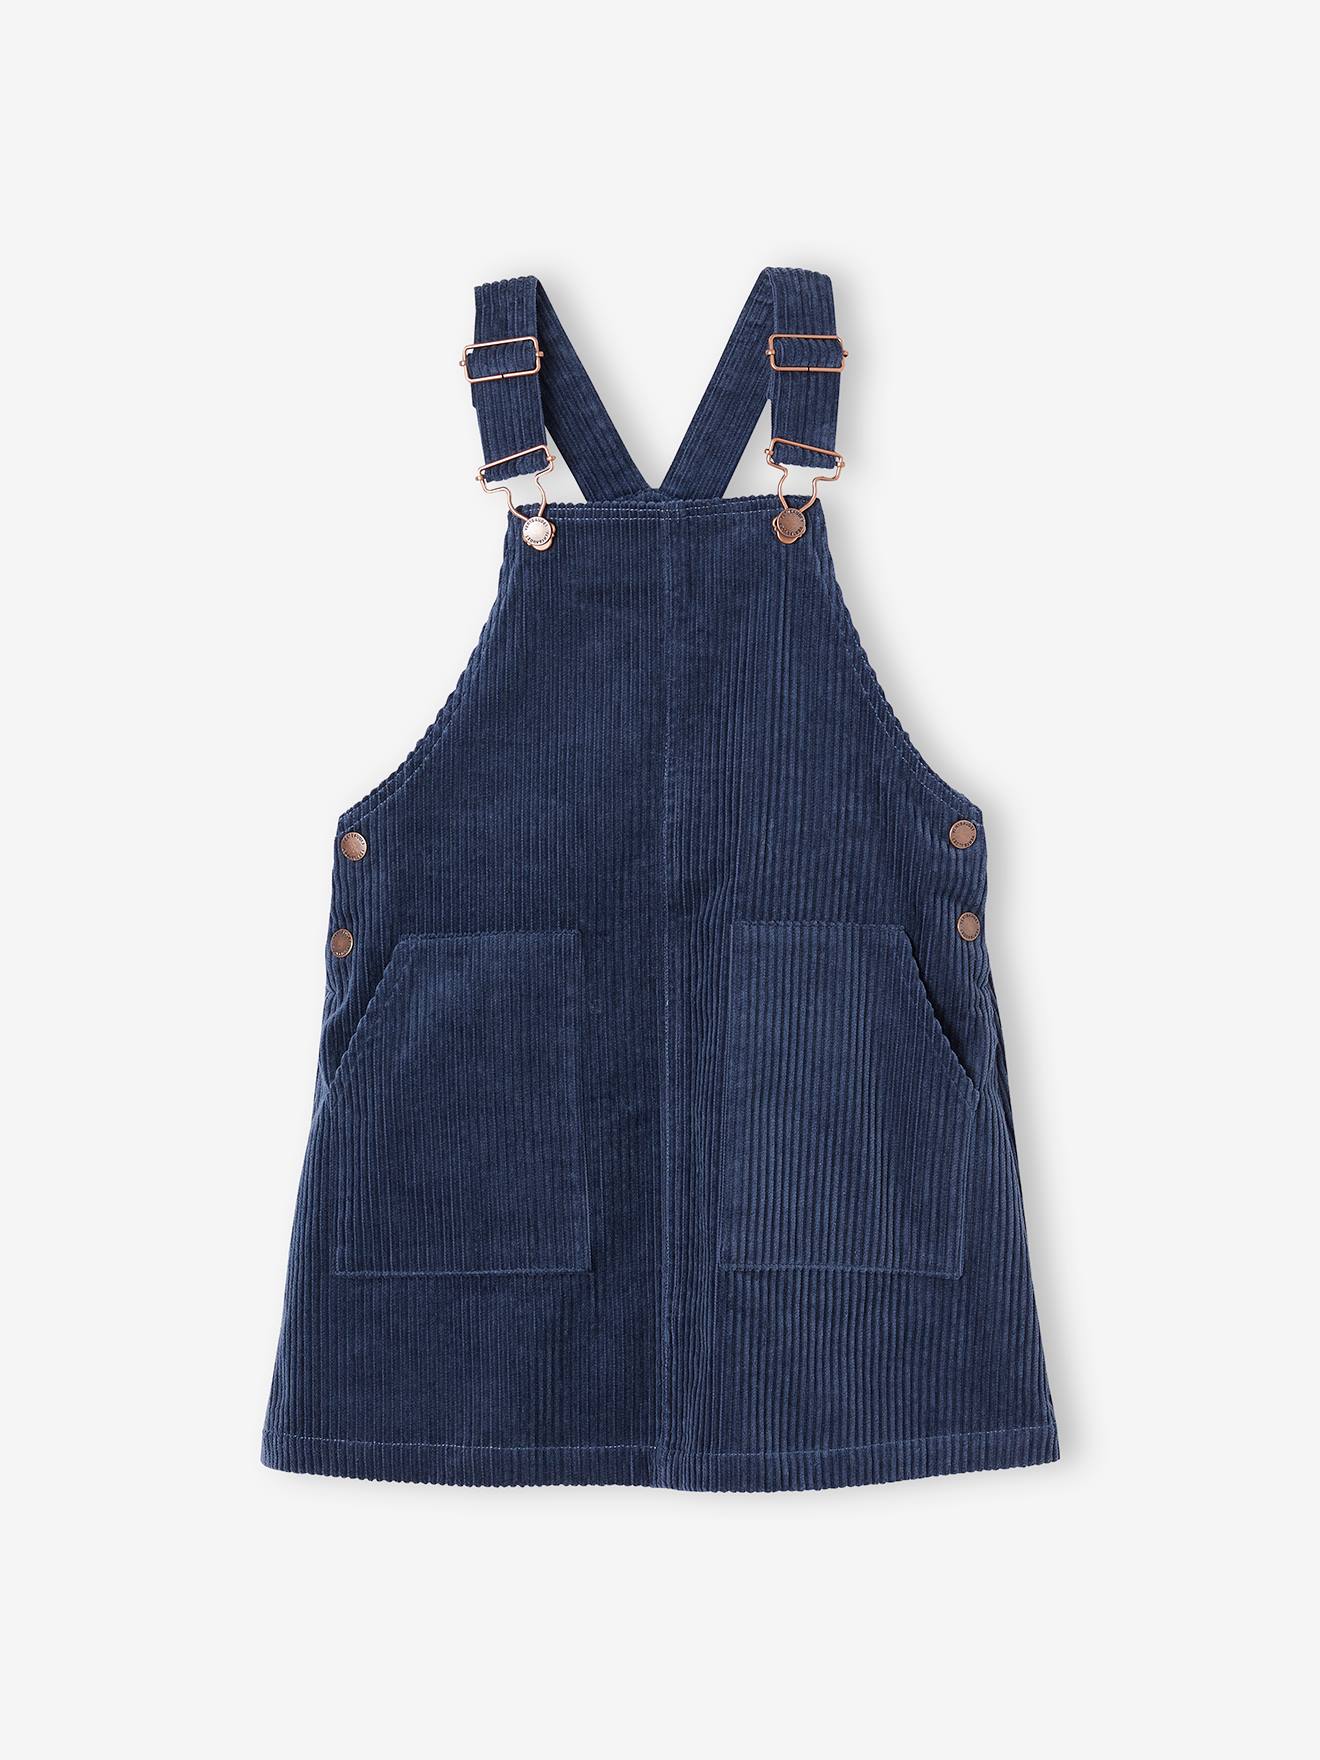 Top + Corduroy Dungaree Dress Outfit for Girls - night blue, Girls